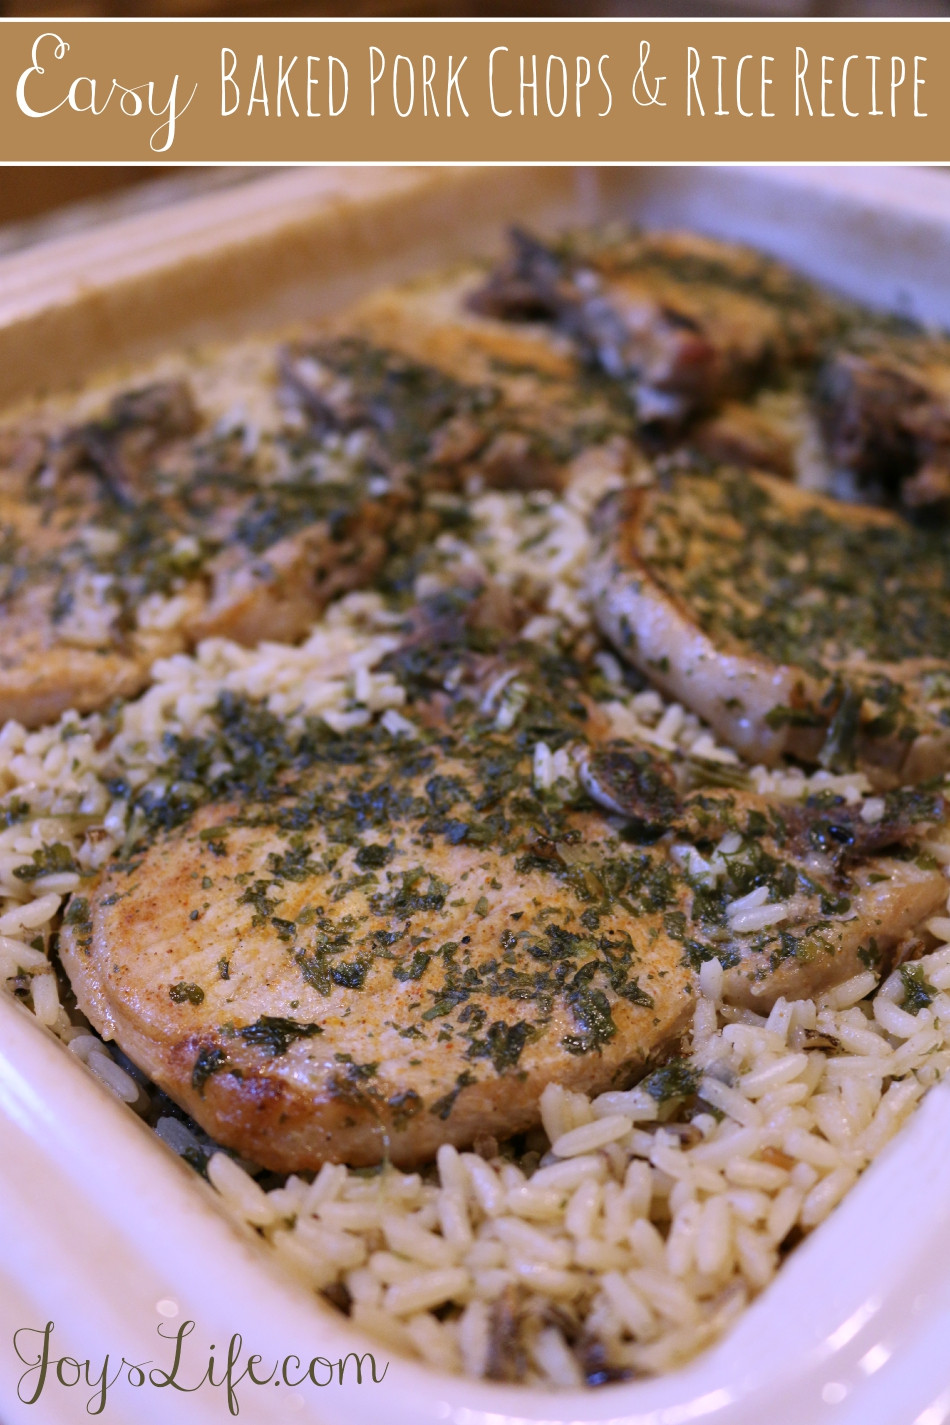 Pork Chops And Rice Recipe
 Easy Baked Pork Chops and Rice Recipe